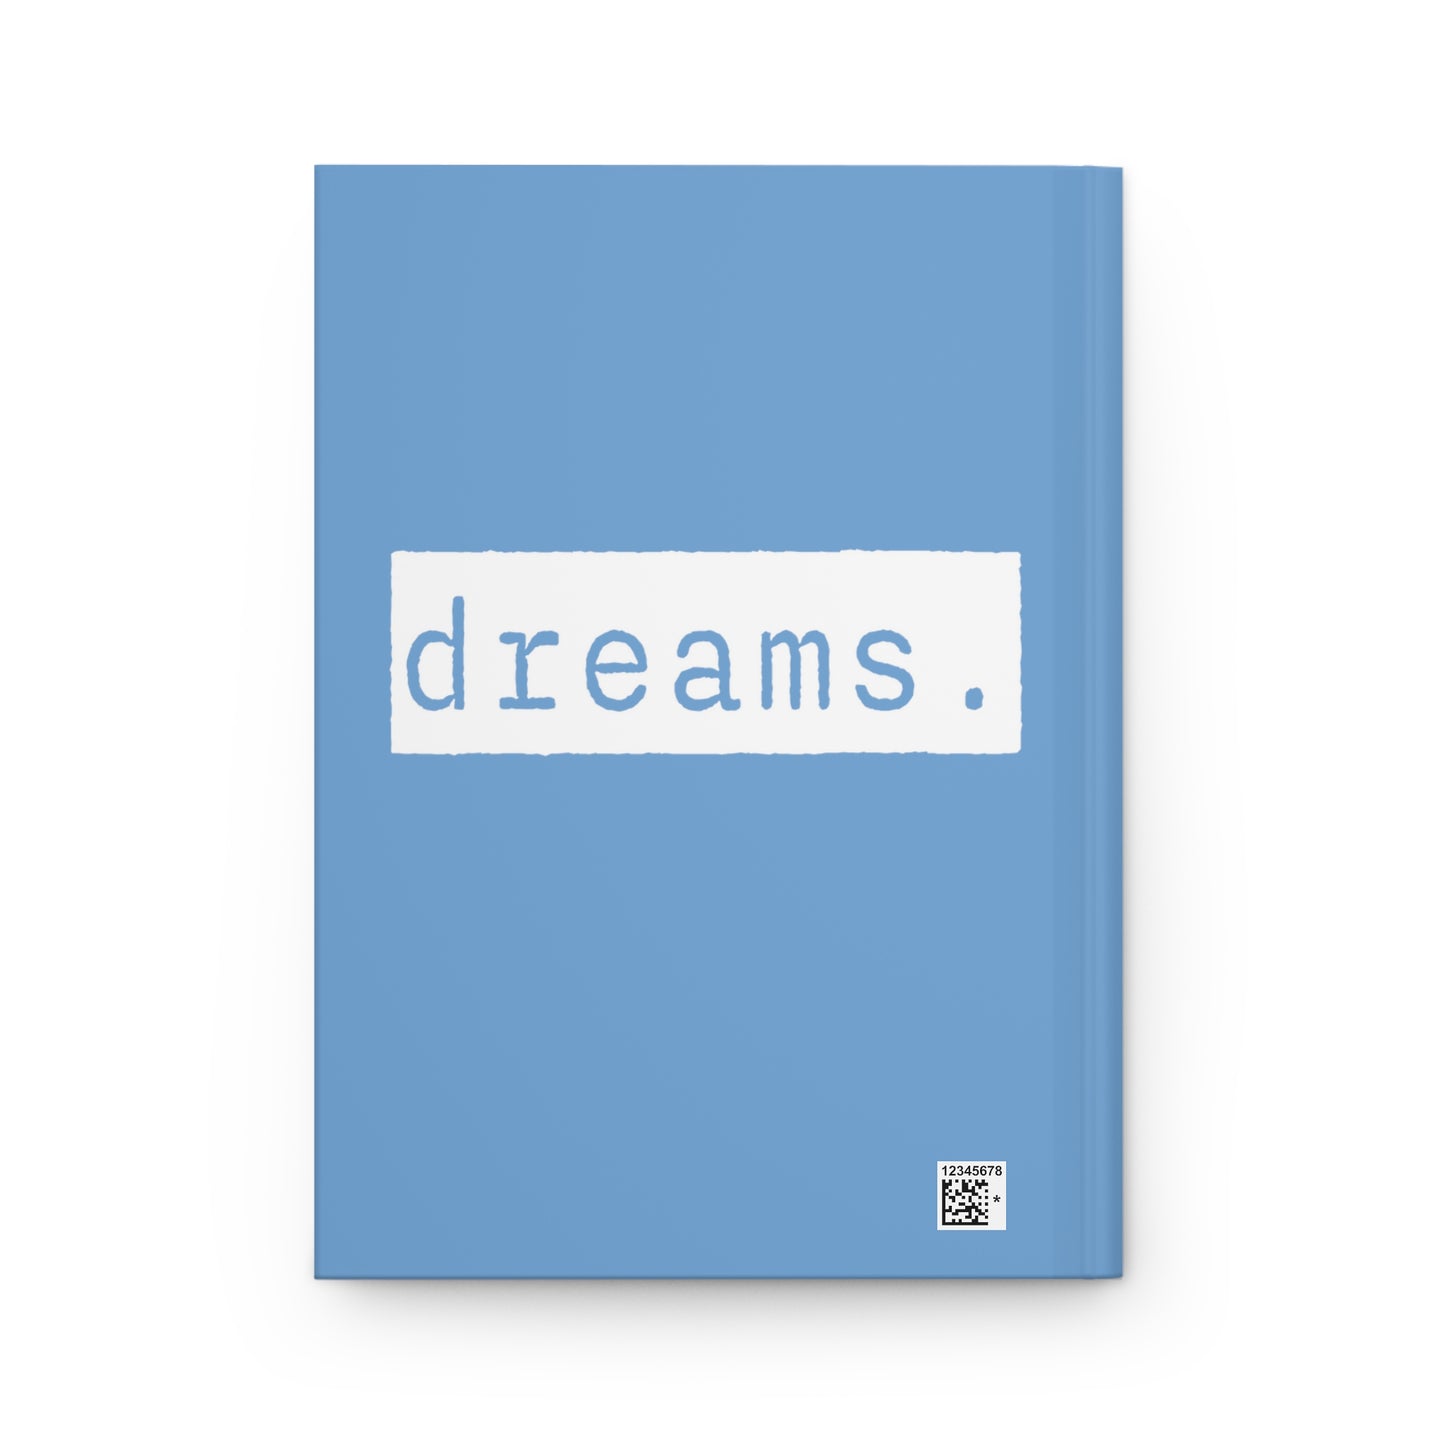 Dreams Blue Matte Hardcover Journal | Blank Book | Lined Notebook Diary Dream Log